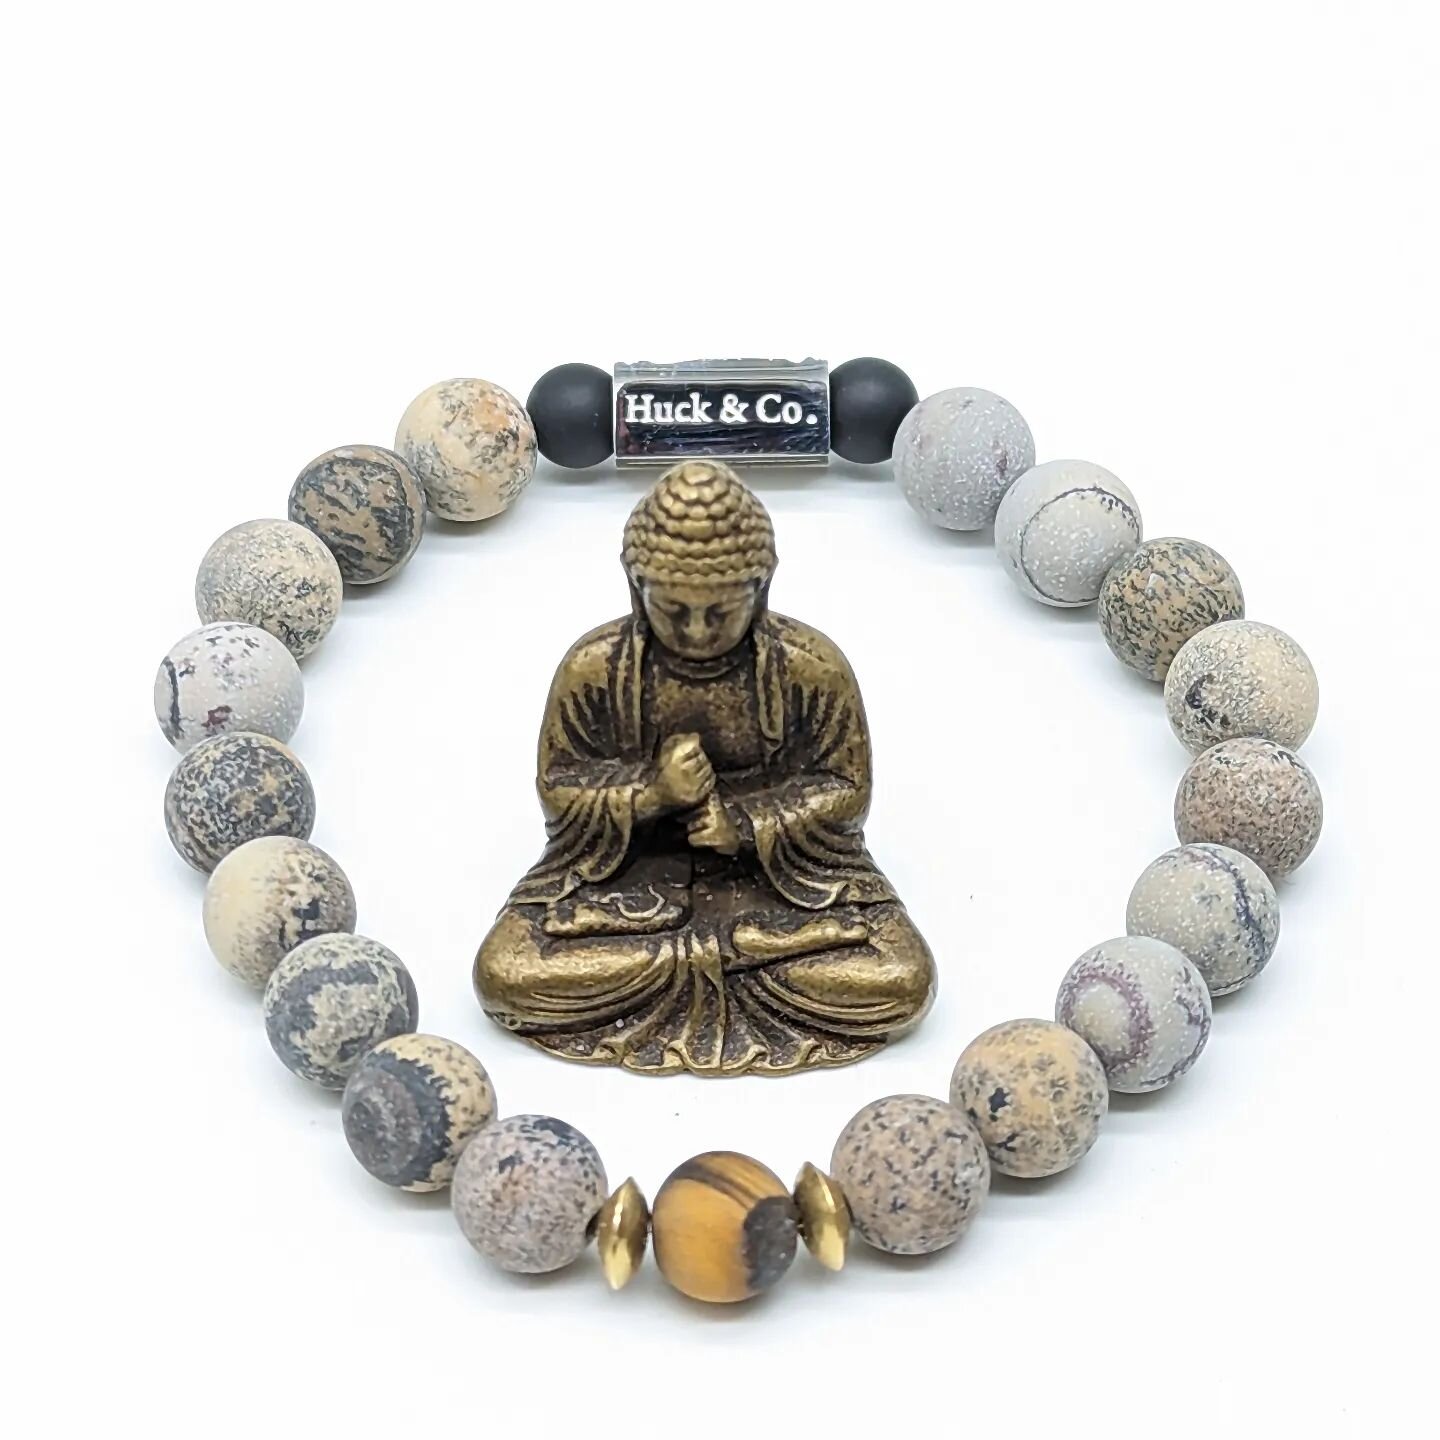 Peace
Matte dendric jasper for courage and calm.  Matte tiger's eye for insight and grounding.  Black onyx for wisdom and banishing grief. 
#lawofattraction #love #belief #intentionsetting #joy #happiness #changeyourworld  #americancancersociety